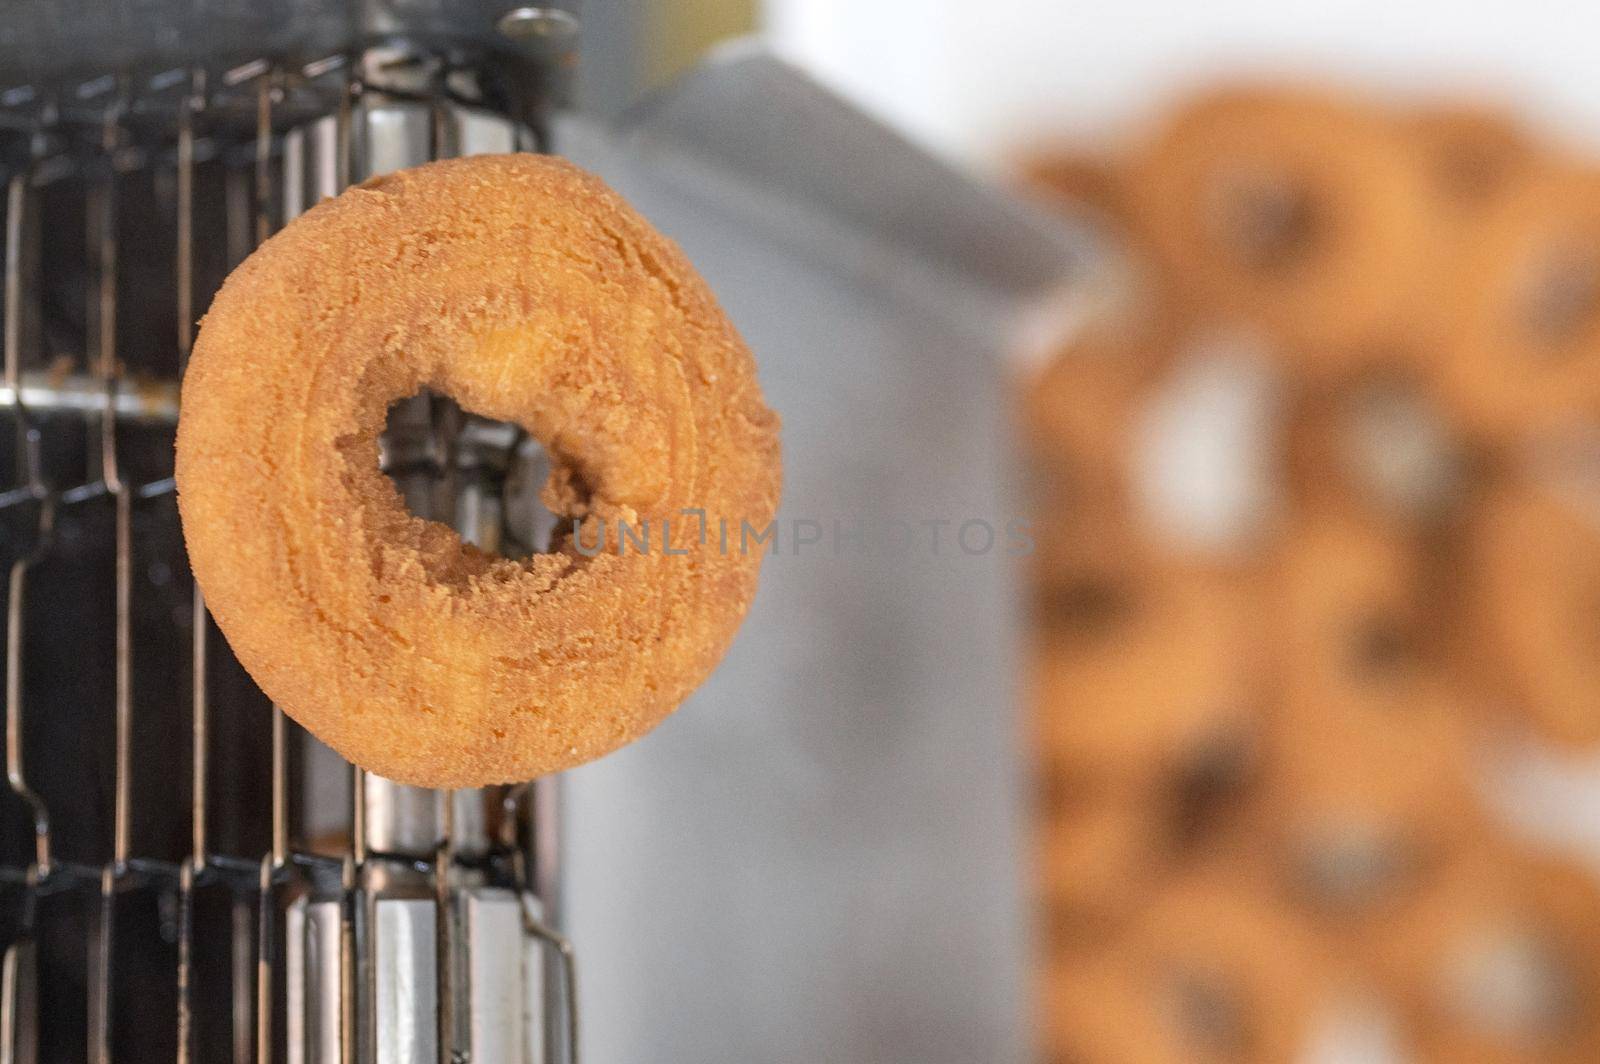 doughnuts or donut on conveyor belt in factory, a type of fried dough confectionery or dessert food. by HERRAEZ